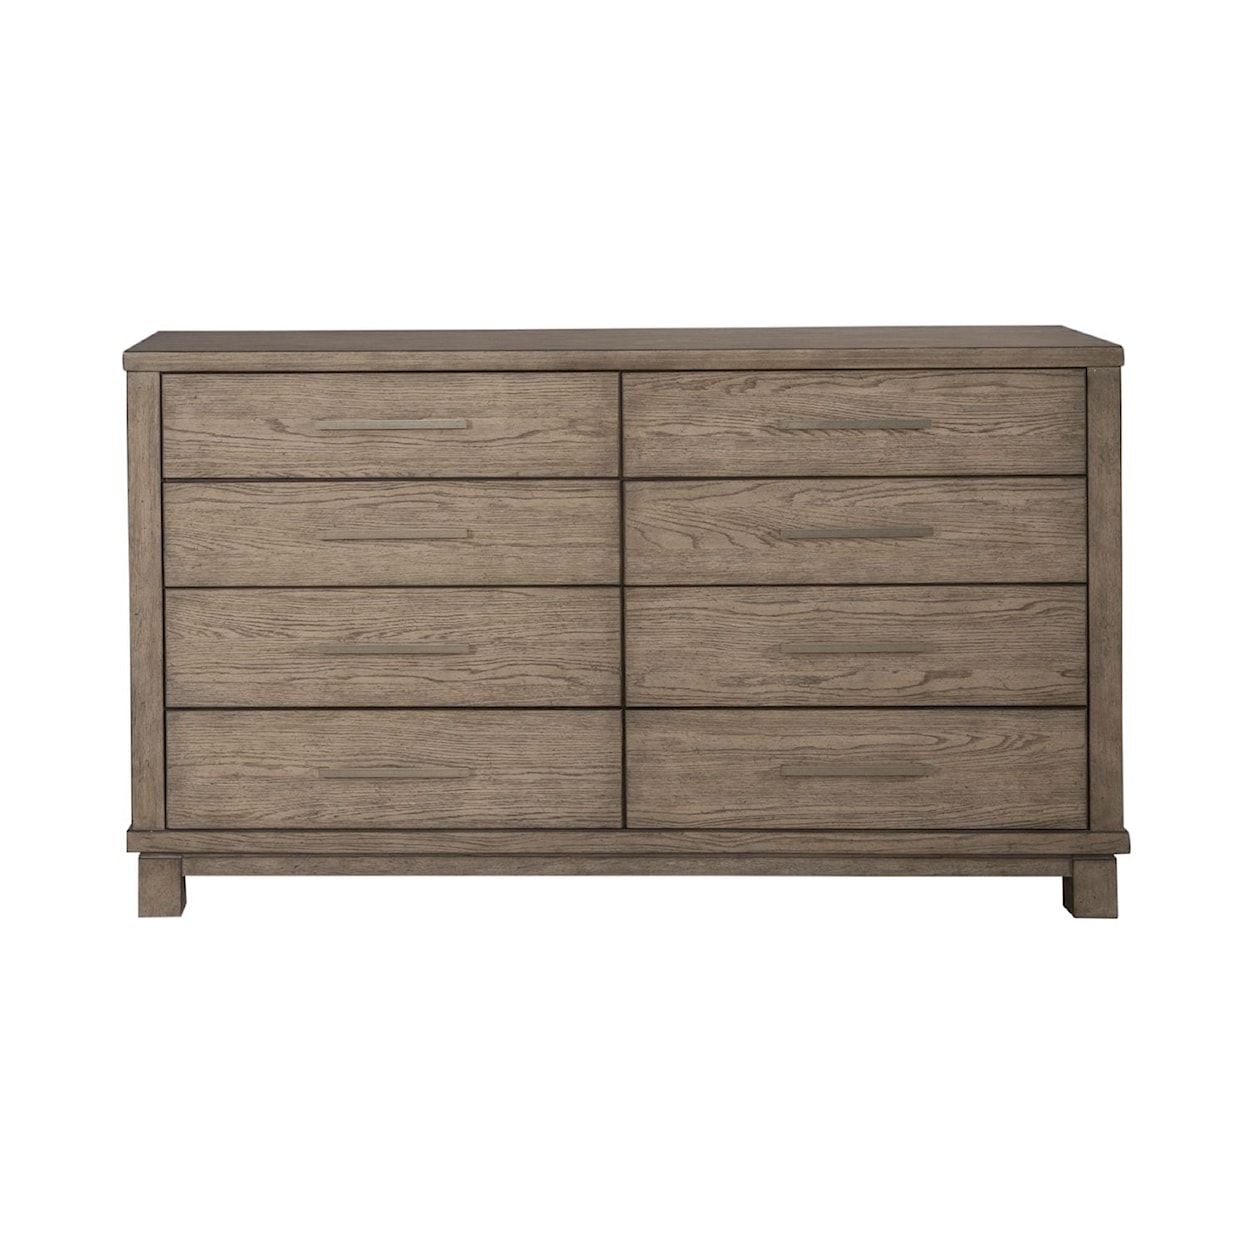 Liberty Furniture Canyon Road 4-Piece King Bedroom Group